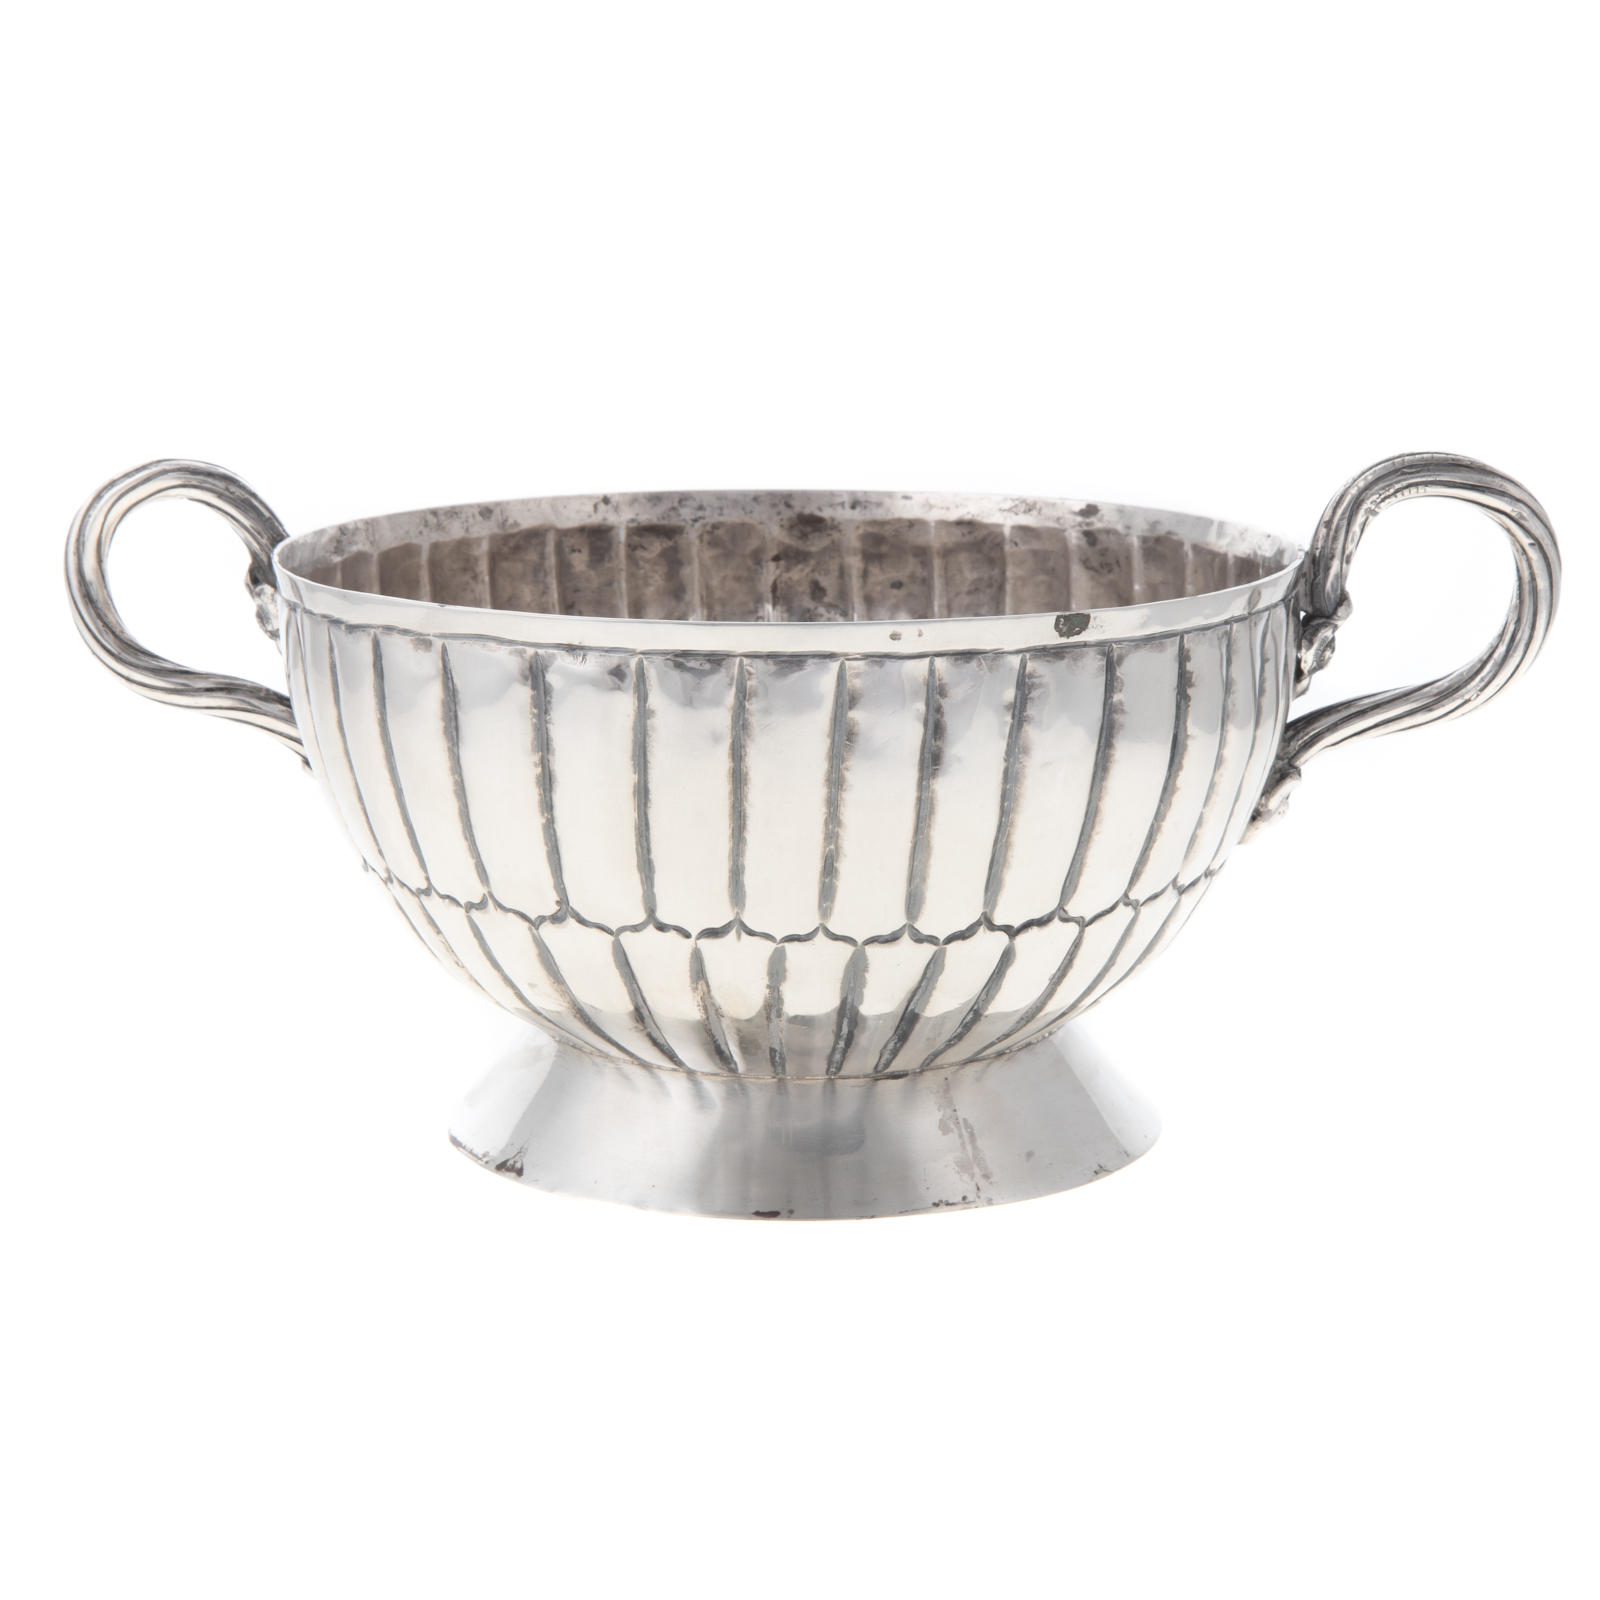 MEXICAN STERLING BOWL BY VIGUERAS 29e0a2